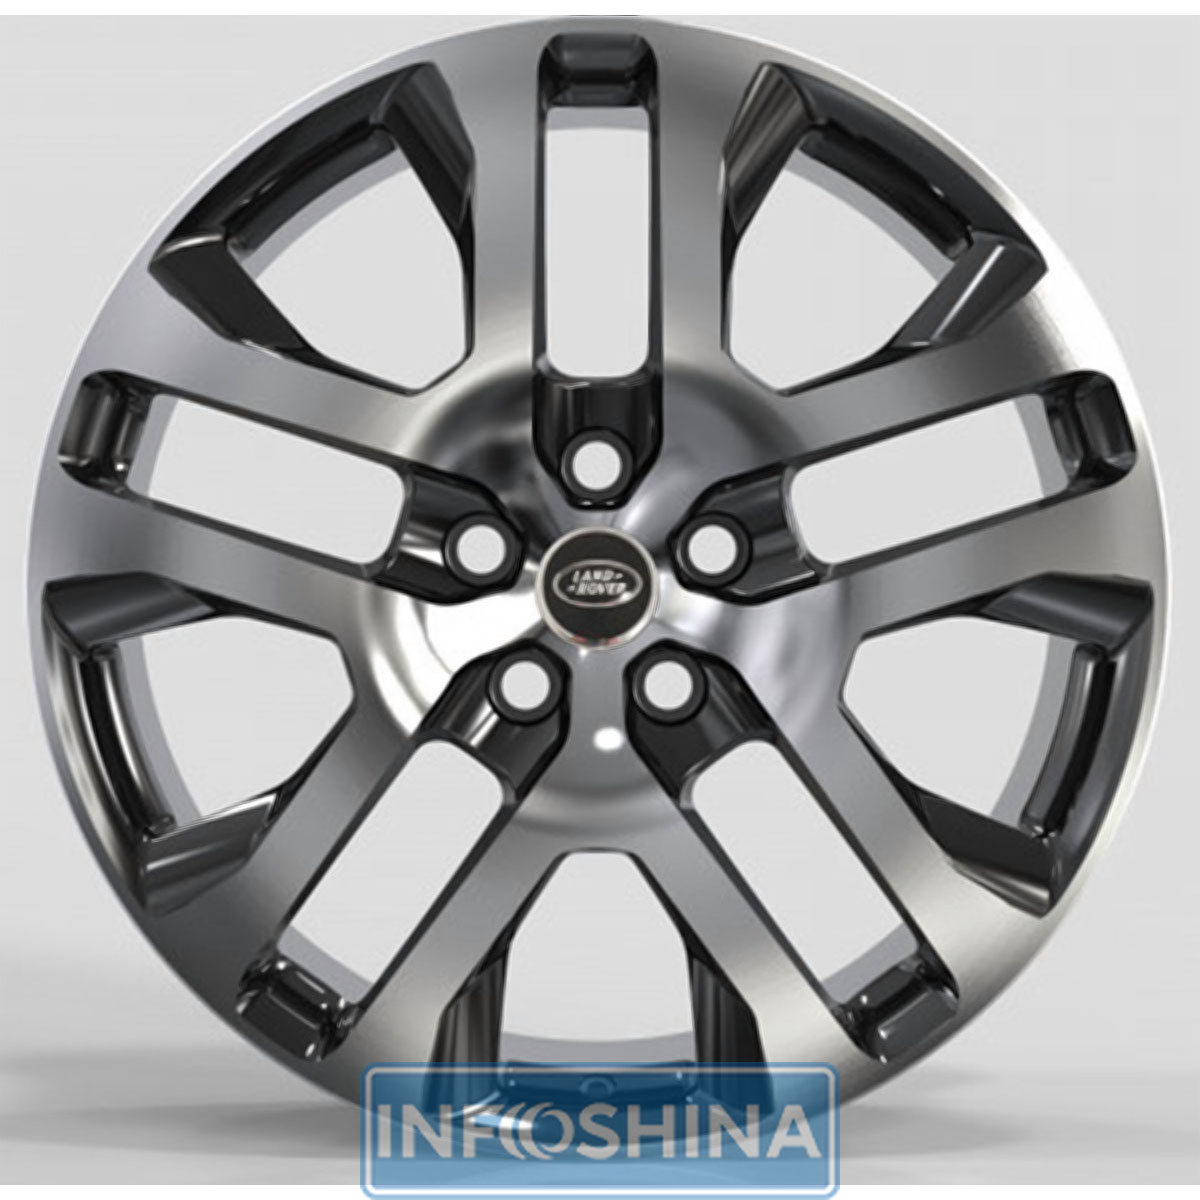 Купить диски Replica Forged LR2241 Gloss Black With Machined Face R20 W8.5 PCD5x120 ET41.5 DIA72.6